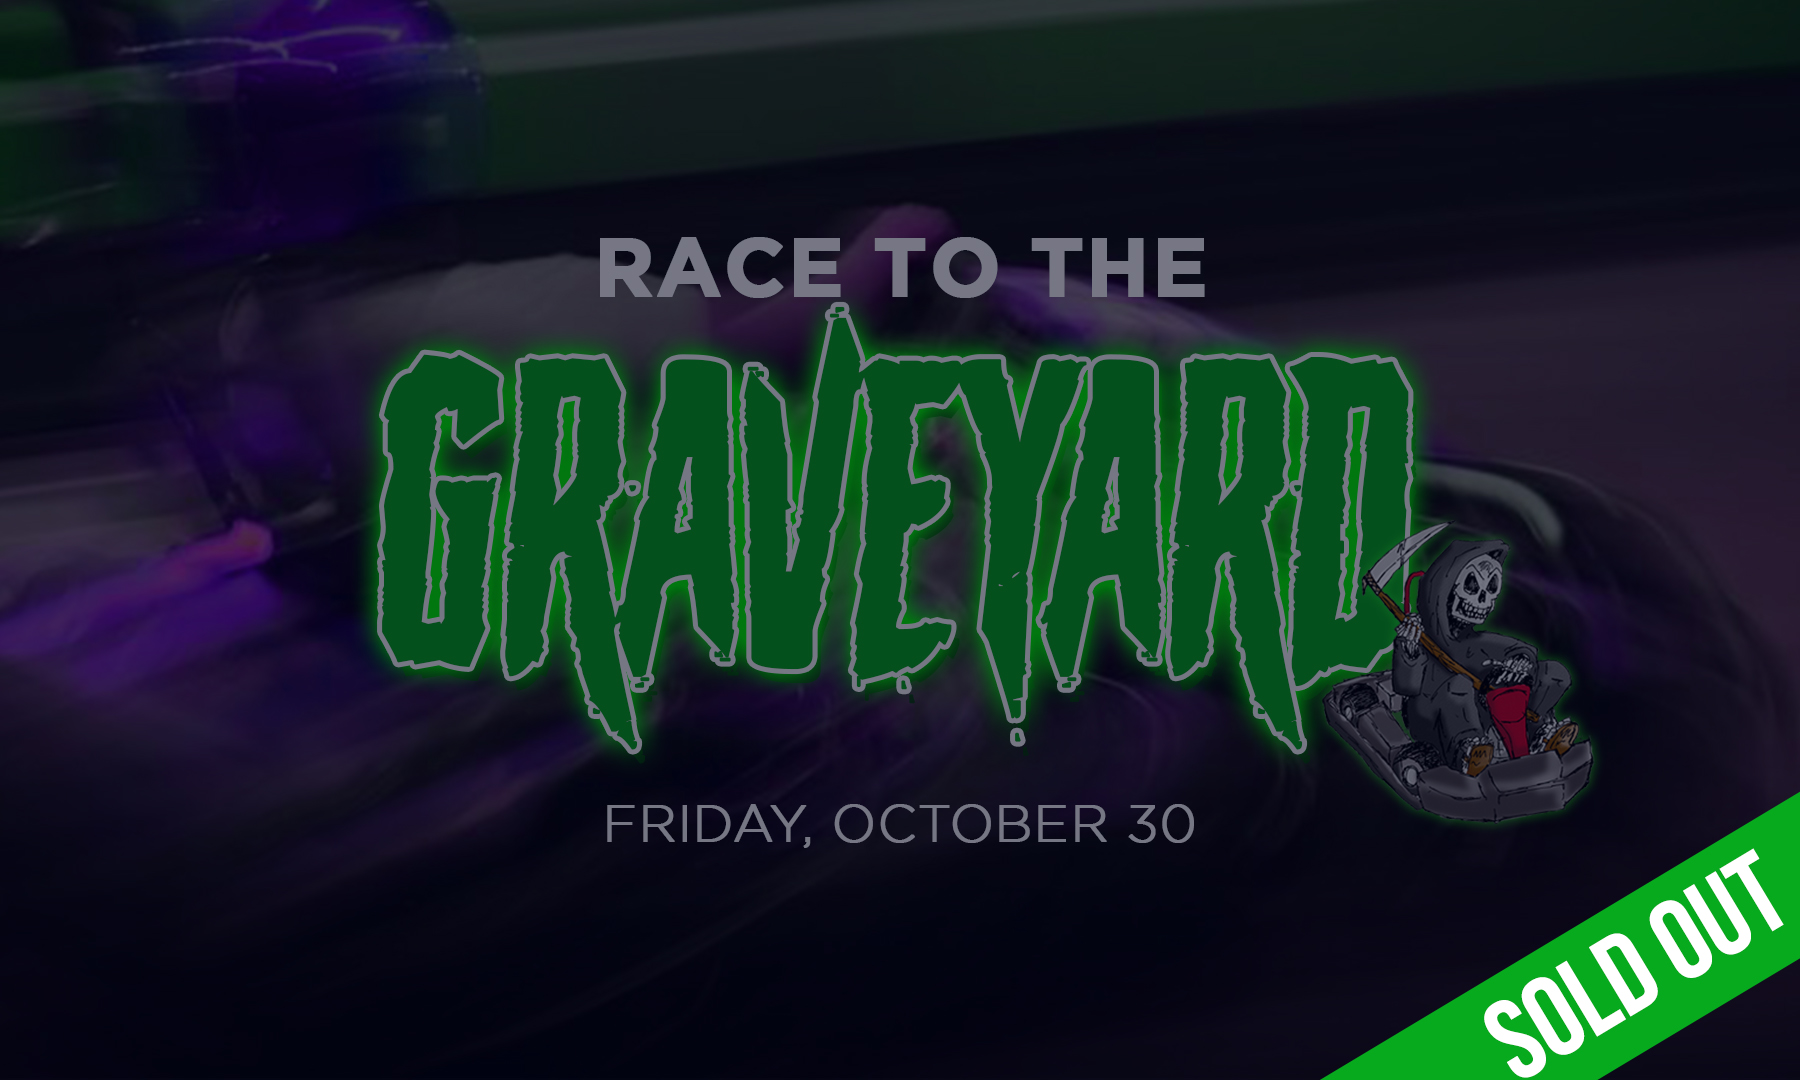 Race to the Graveyard 2020